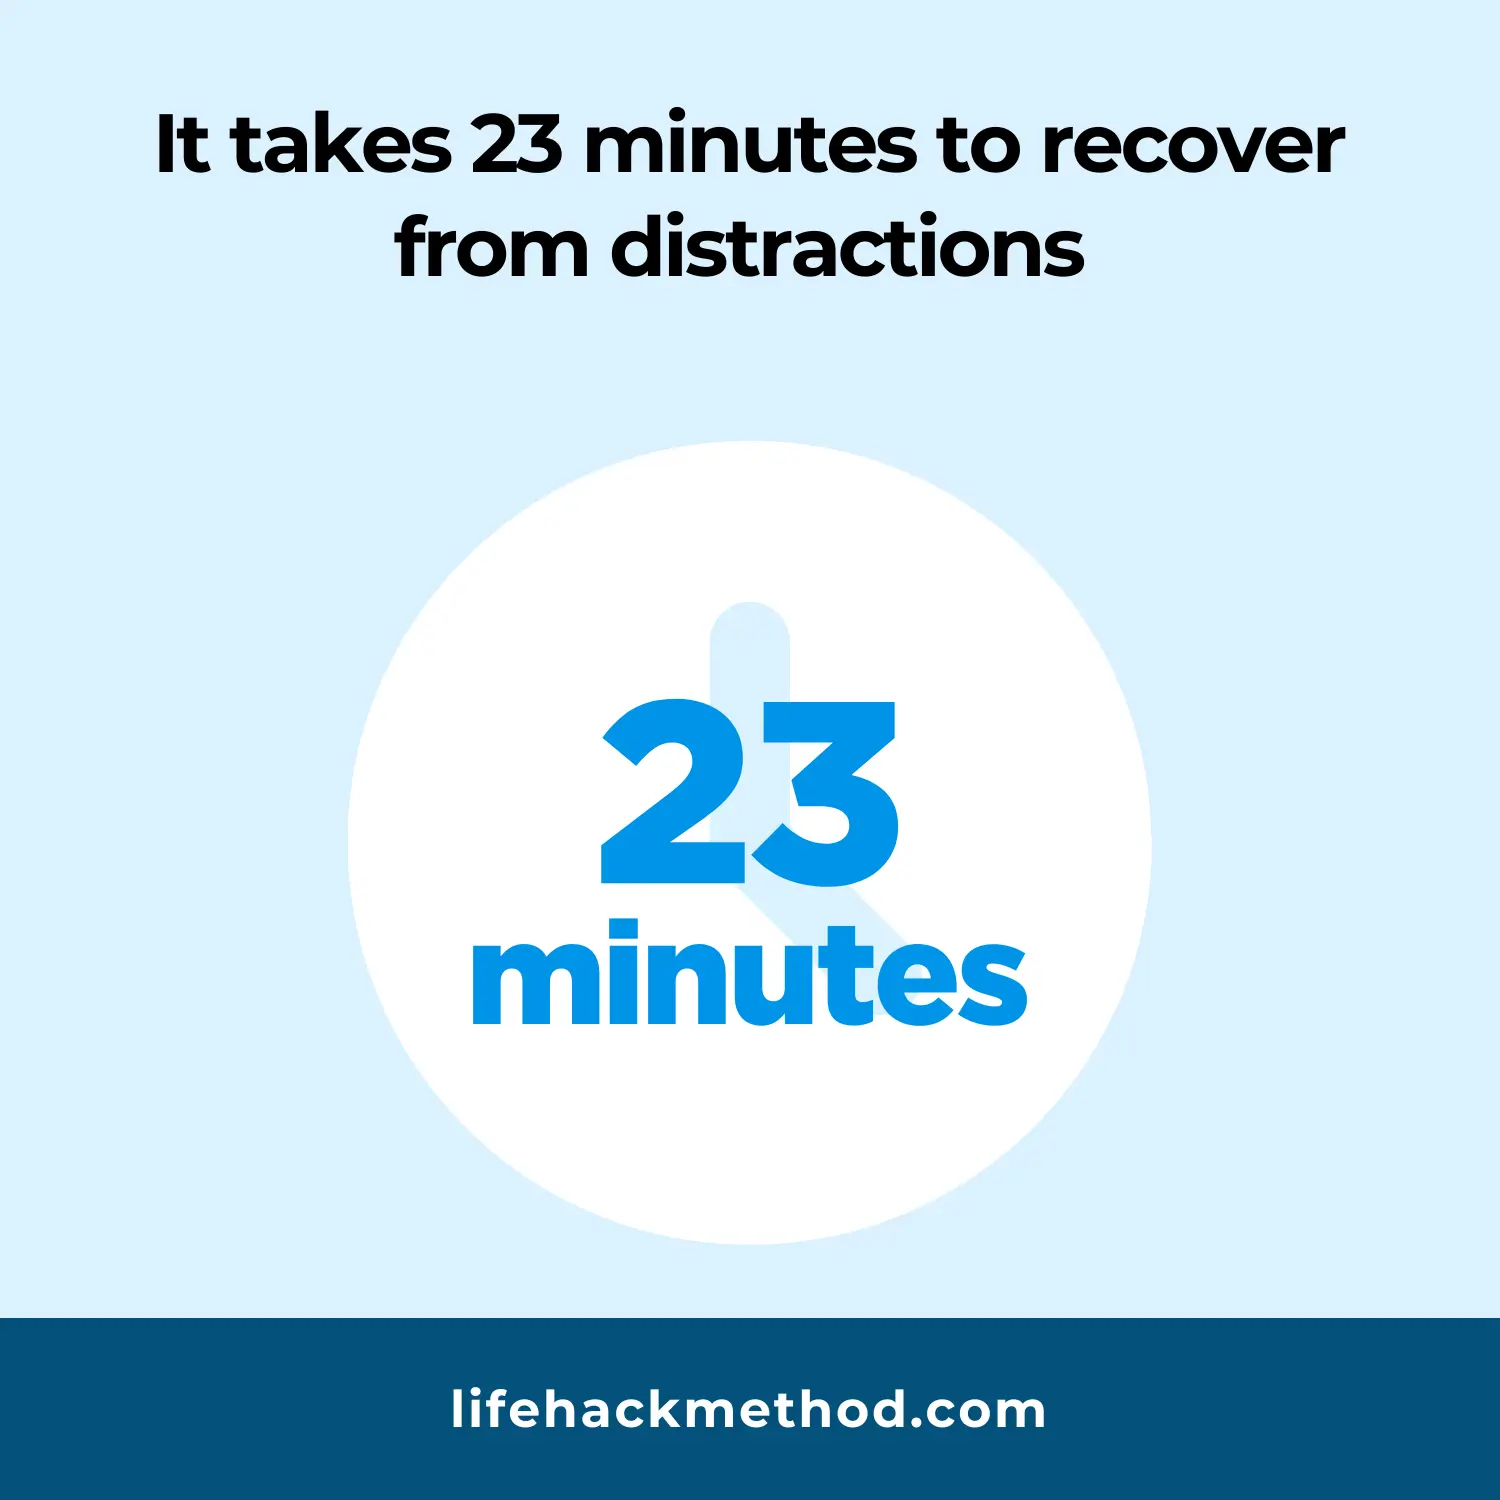 Graph showing it takes 23 minutes to recover from distractions